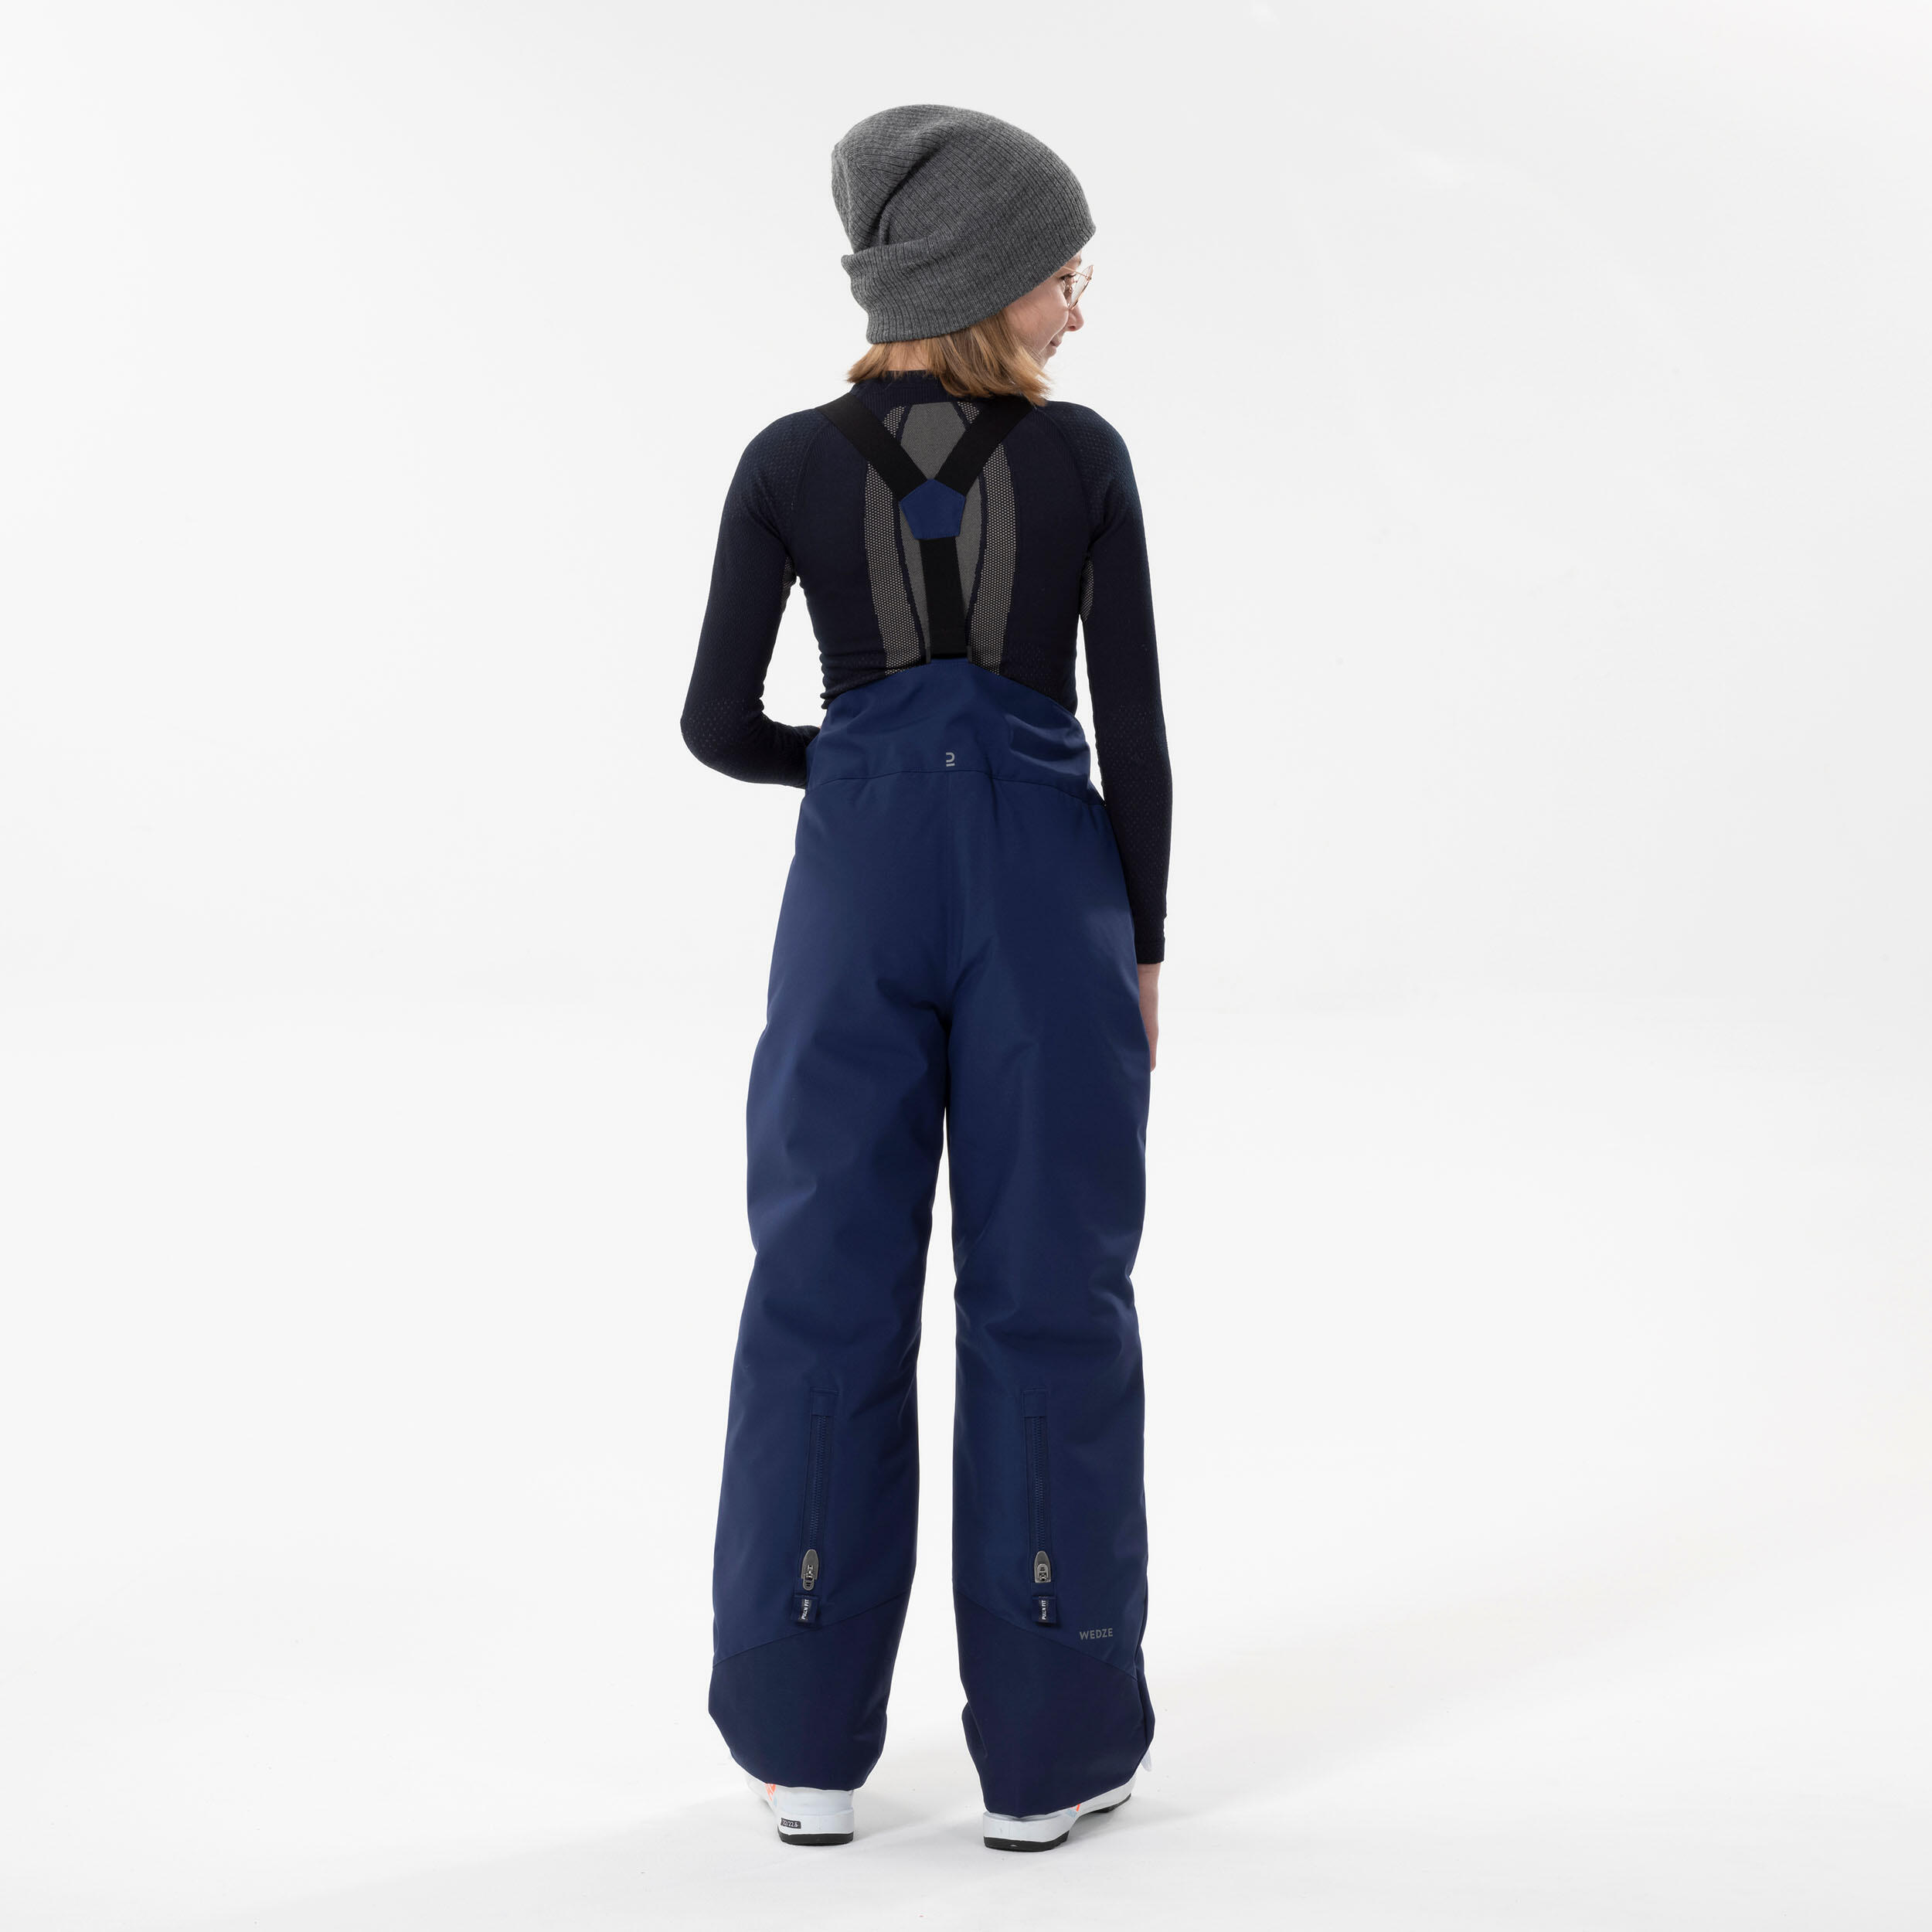 KIDS’ WARM AND WATERPROOF SKI TROUSERS  - 500 PNF - NAVY BLUE 3/8